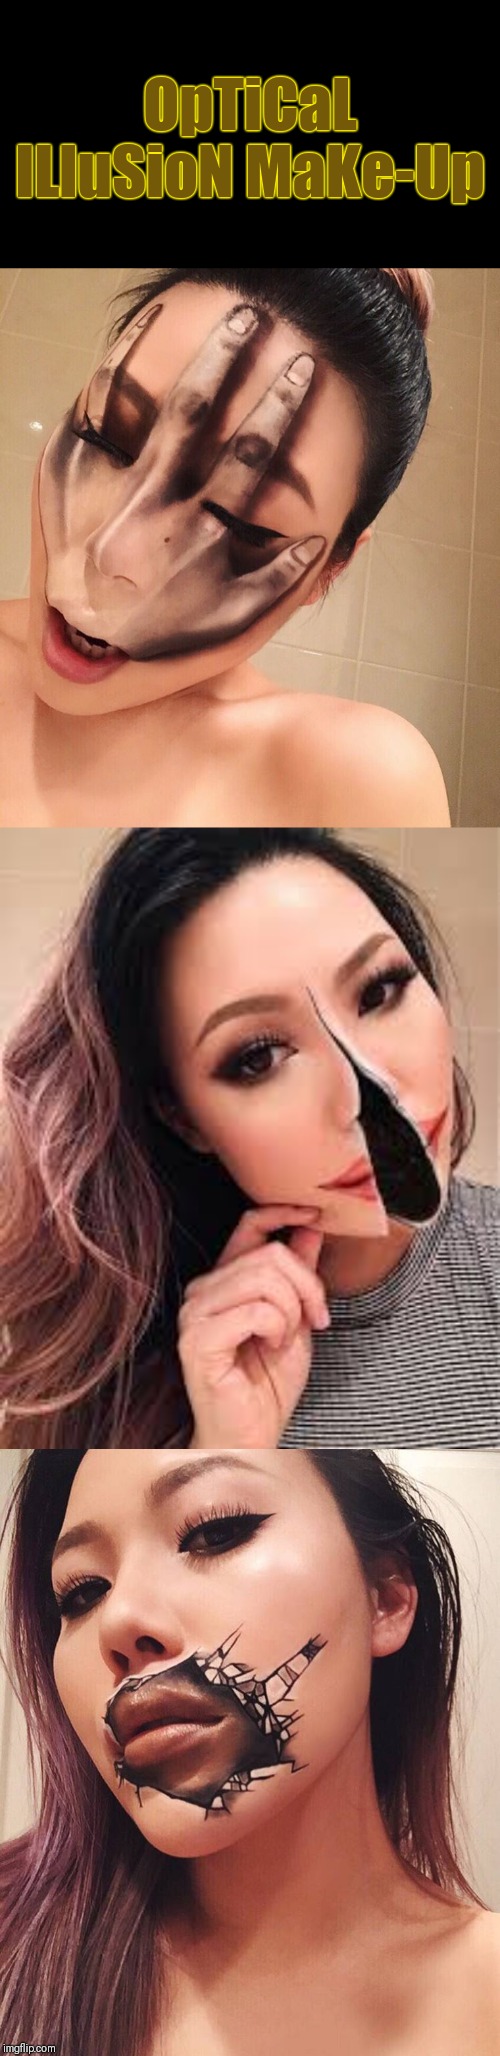 When Your Makeup Artist Is Mimi Choi | OpTiCaL ILluSioN MaKe-Up | image tagged in memes,optical illusion,makeup,creativity,make up artist | made w/ Imgflip meme maker